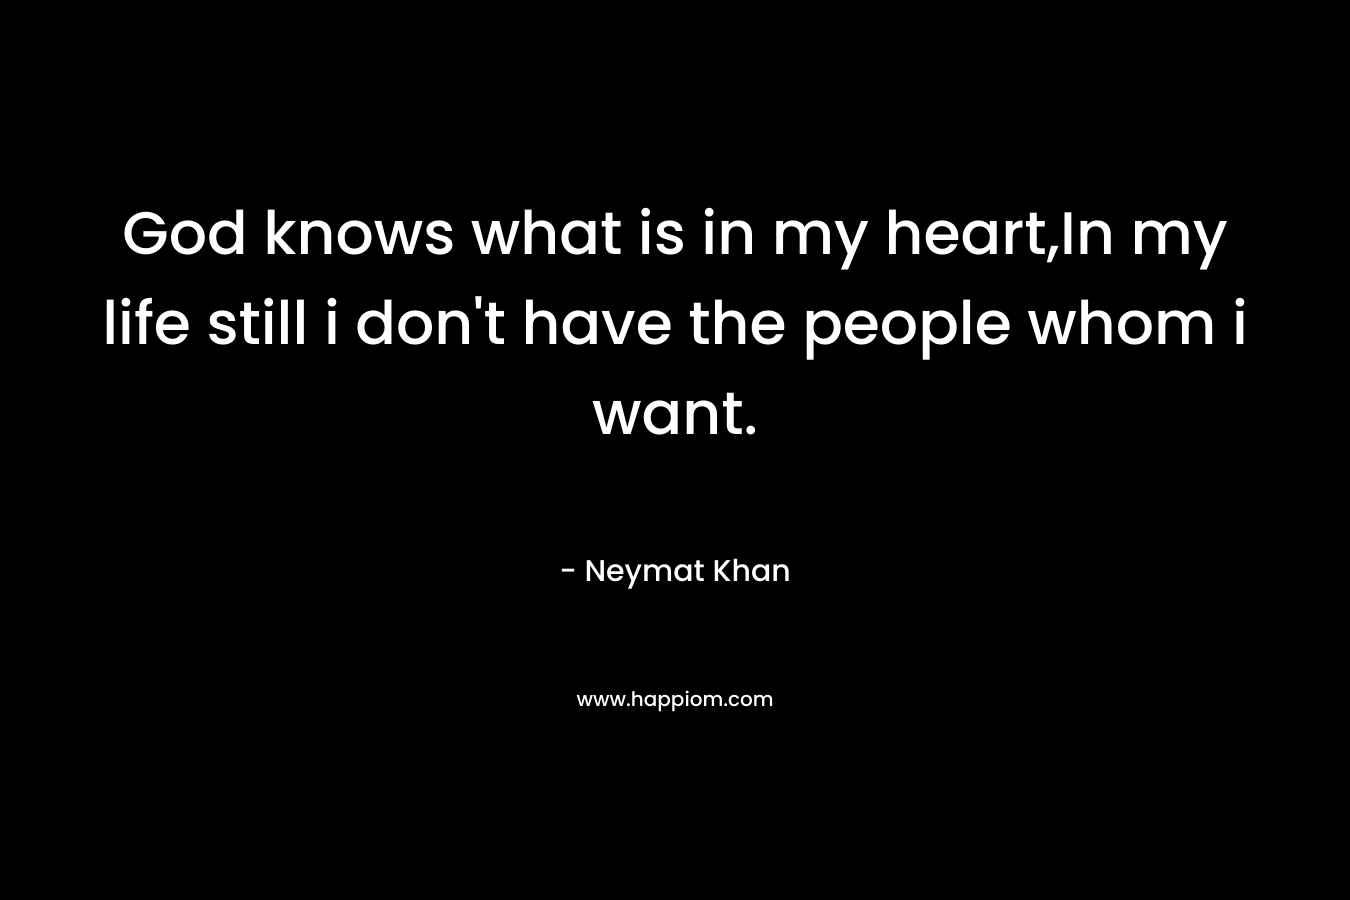 God knows what is in my heart,In my life still i don’t have the people whom i want. – Neymat Khan